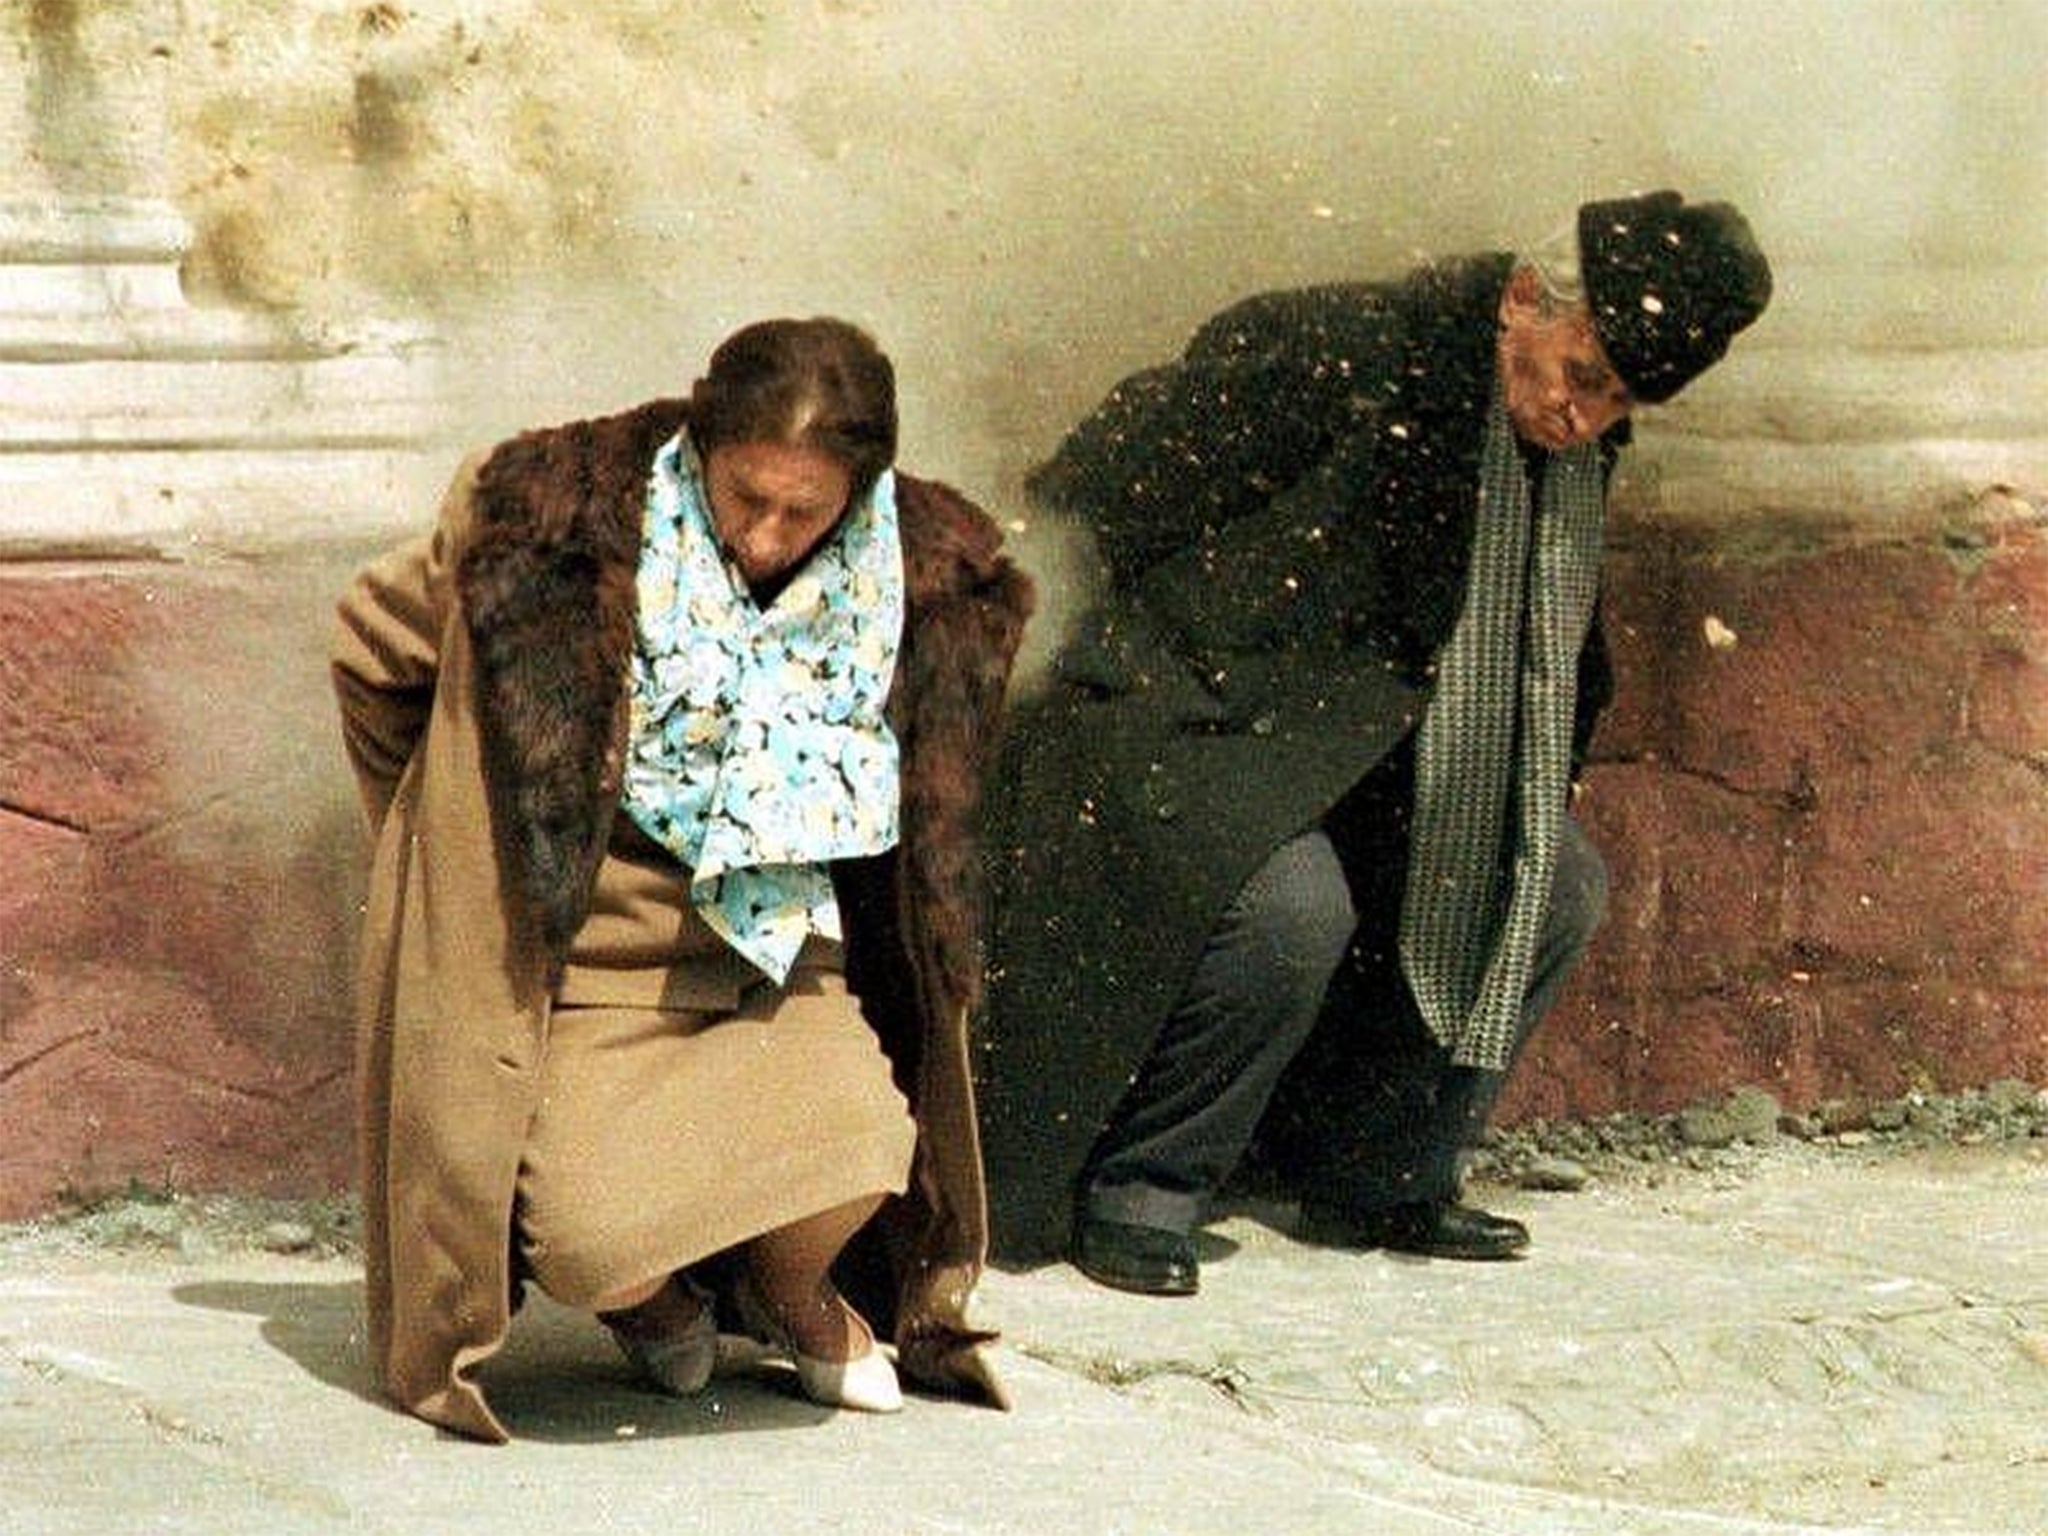 Death of Nicolae Ceausescu and his wife